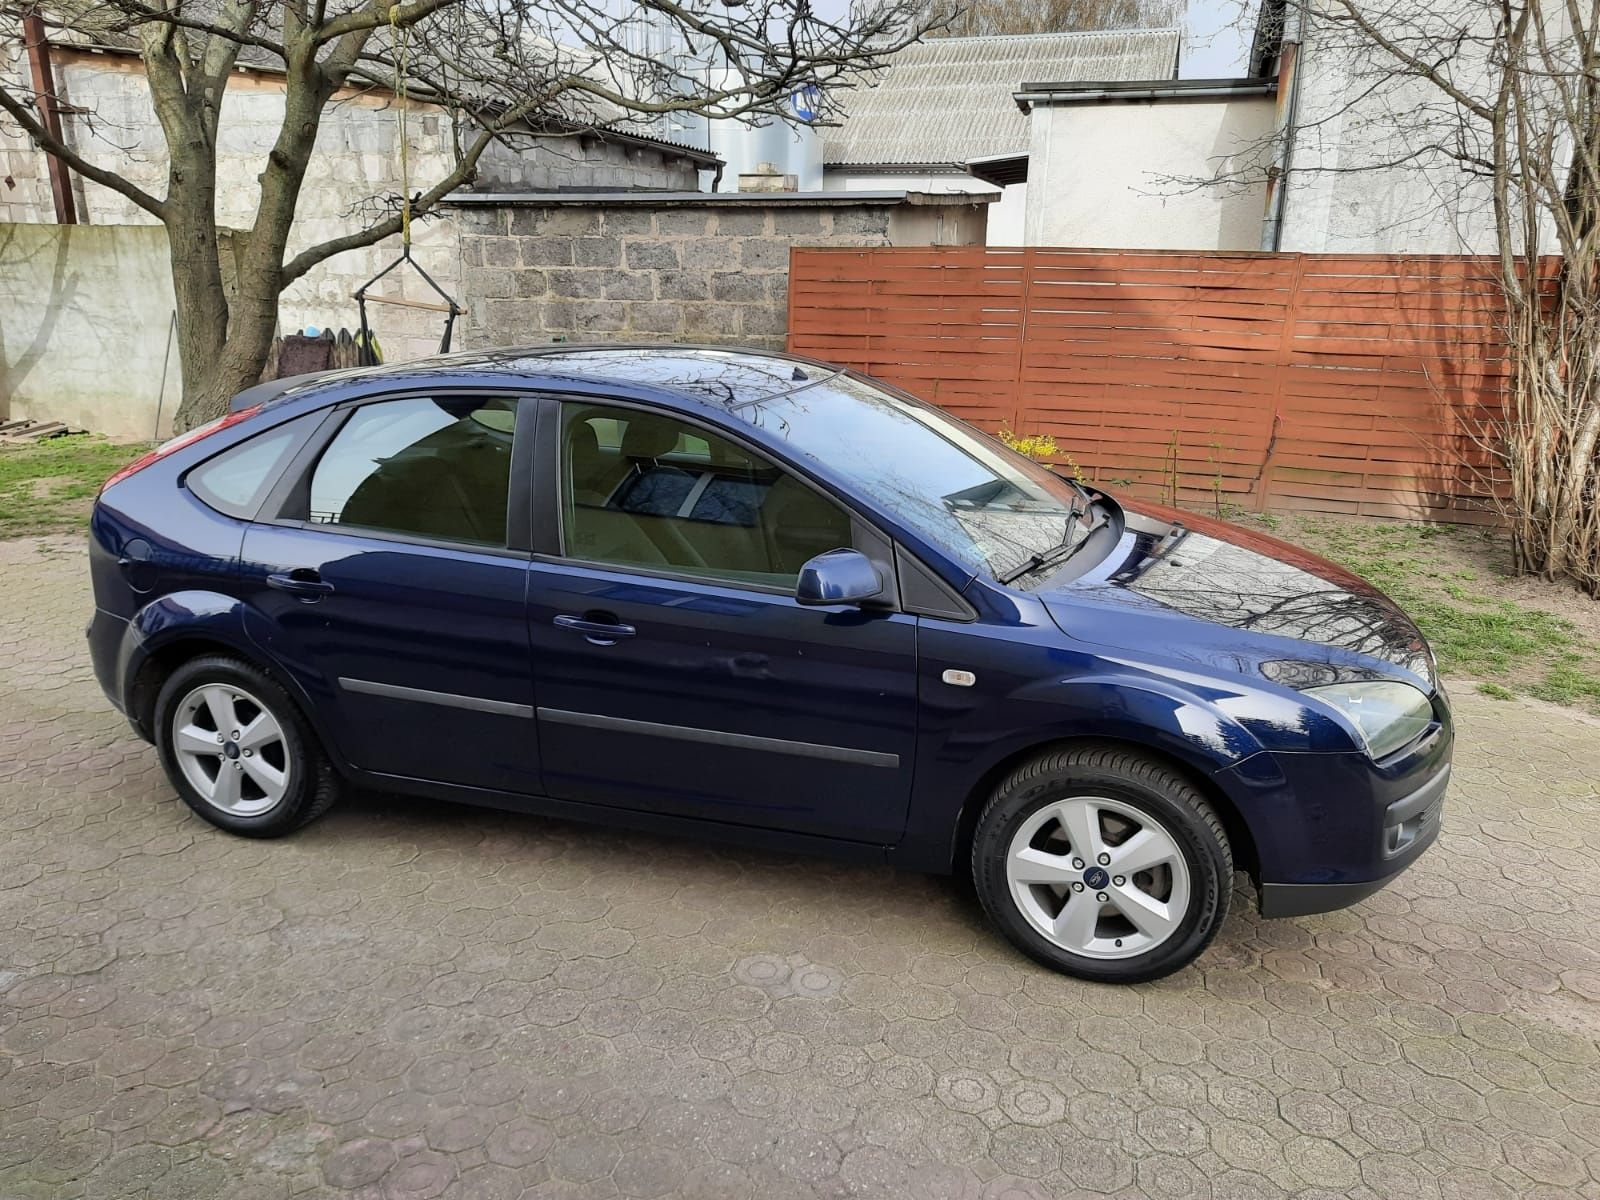 Ford Focus Mk2, 1.6 benzyna